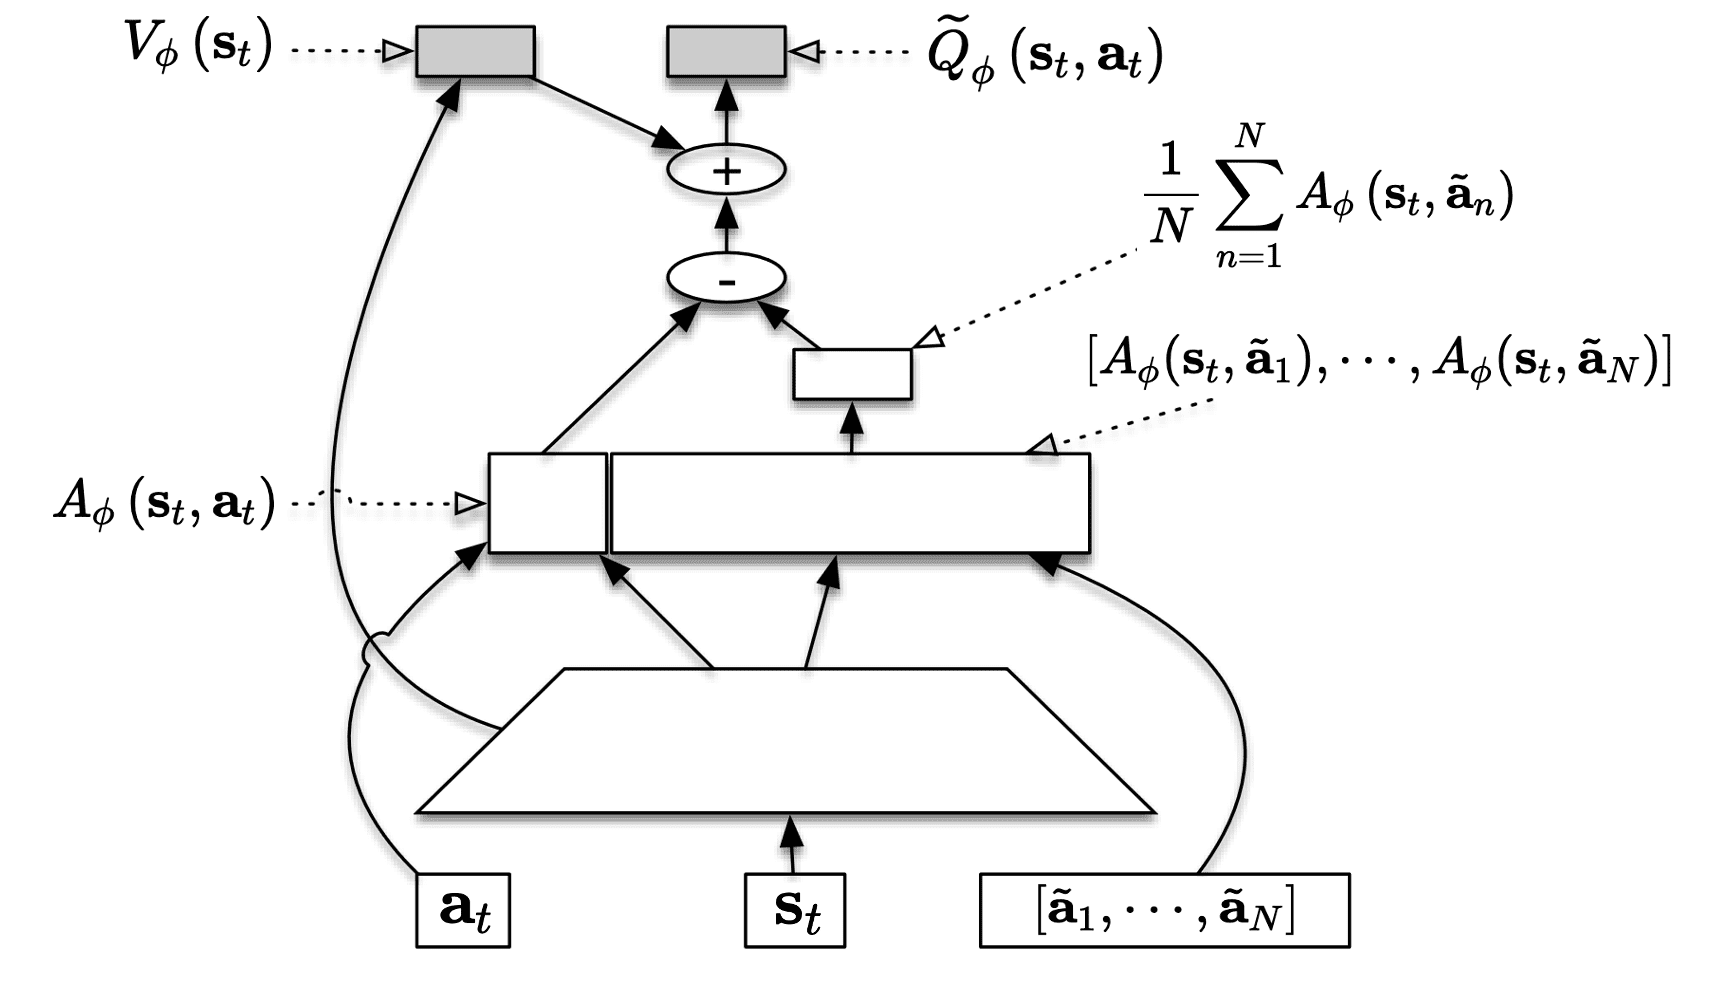 A schematic of the Stochastic Dueling Network (SDN)